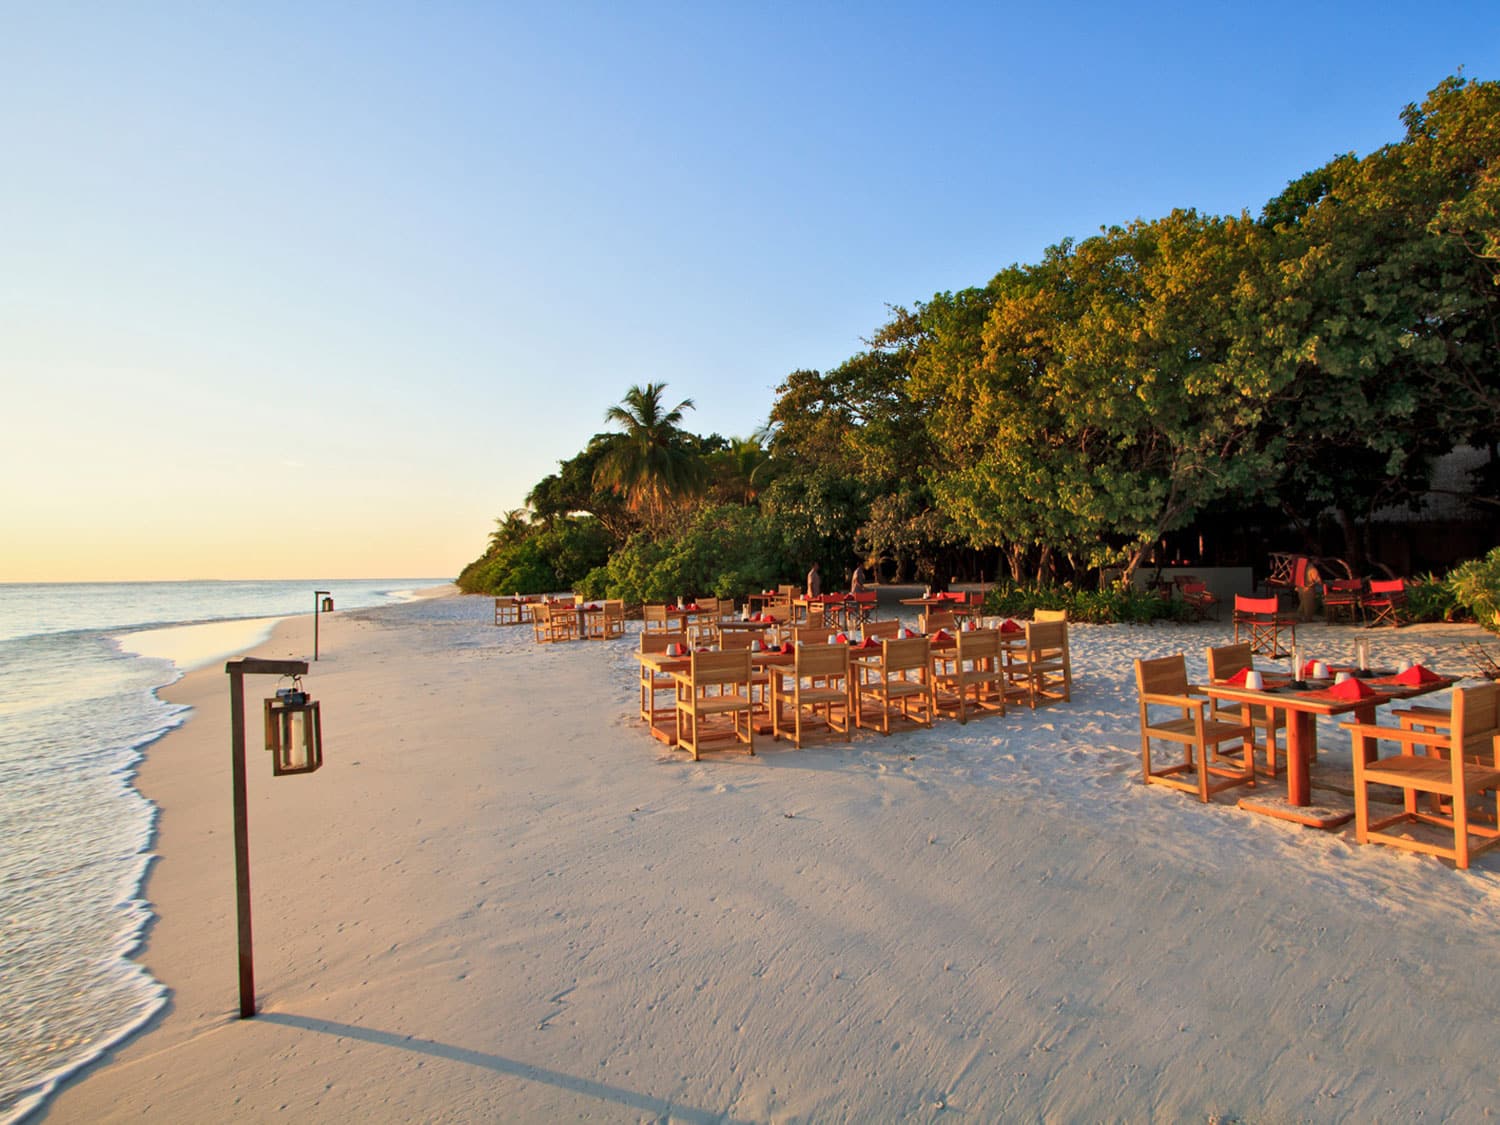 Chairs and tables arranged on an island beach at sunset.